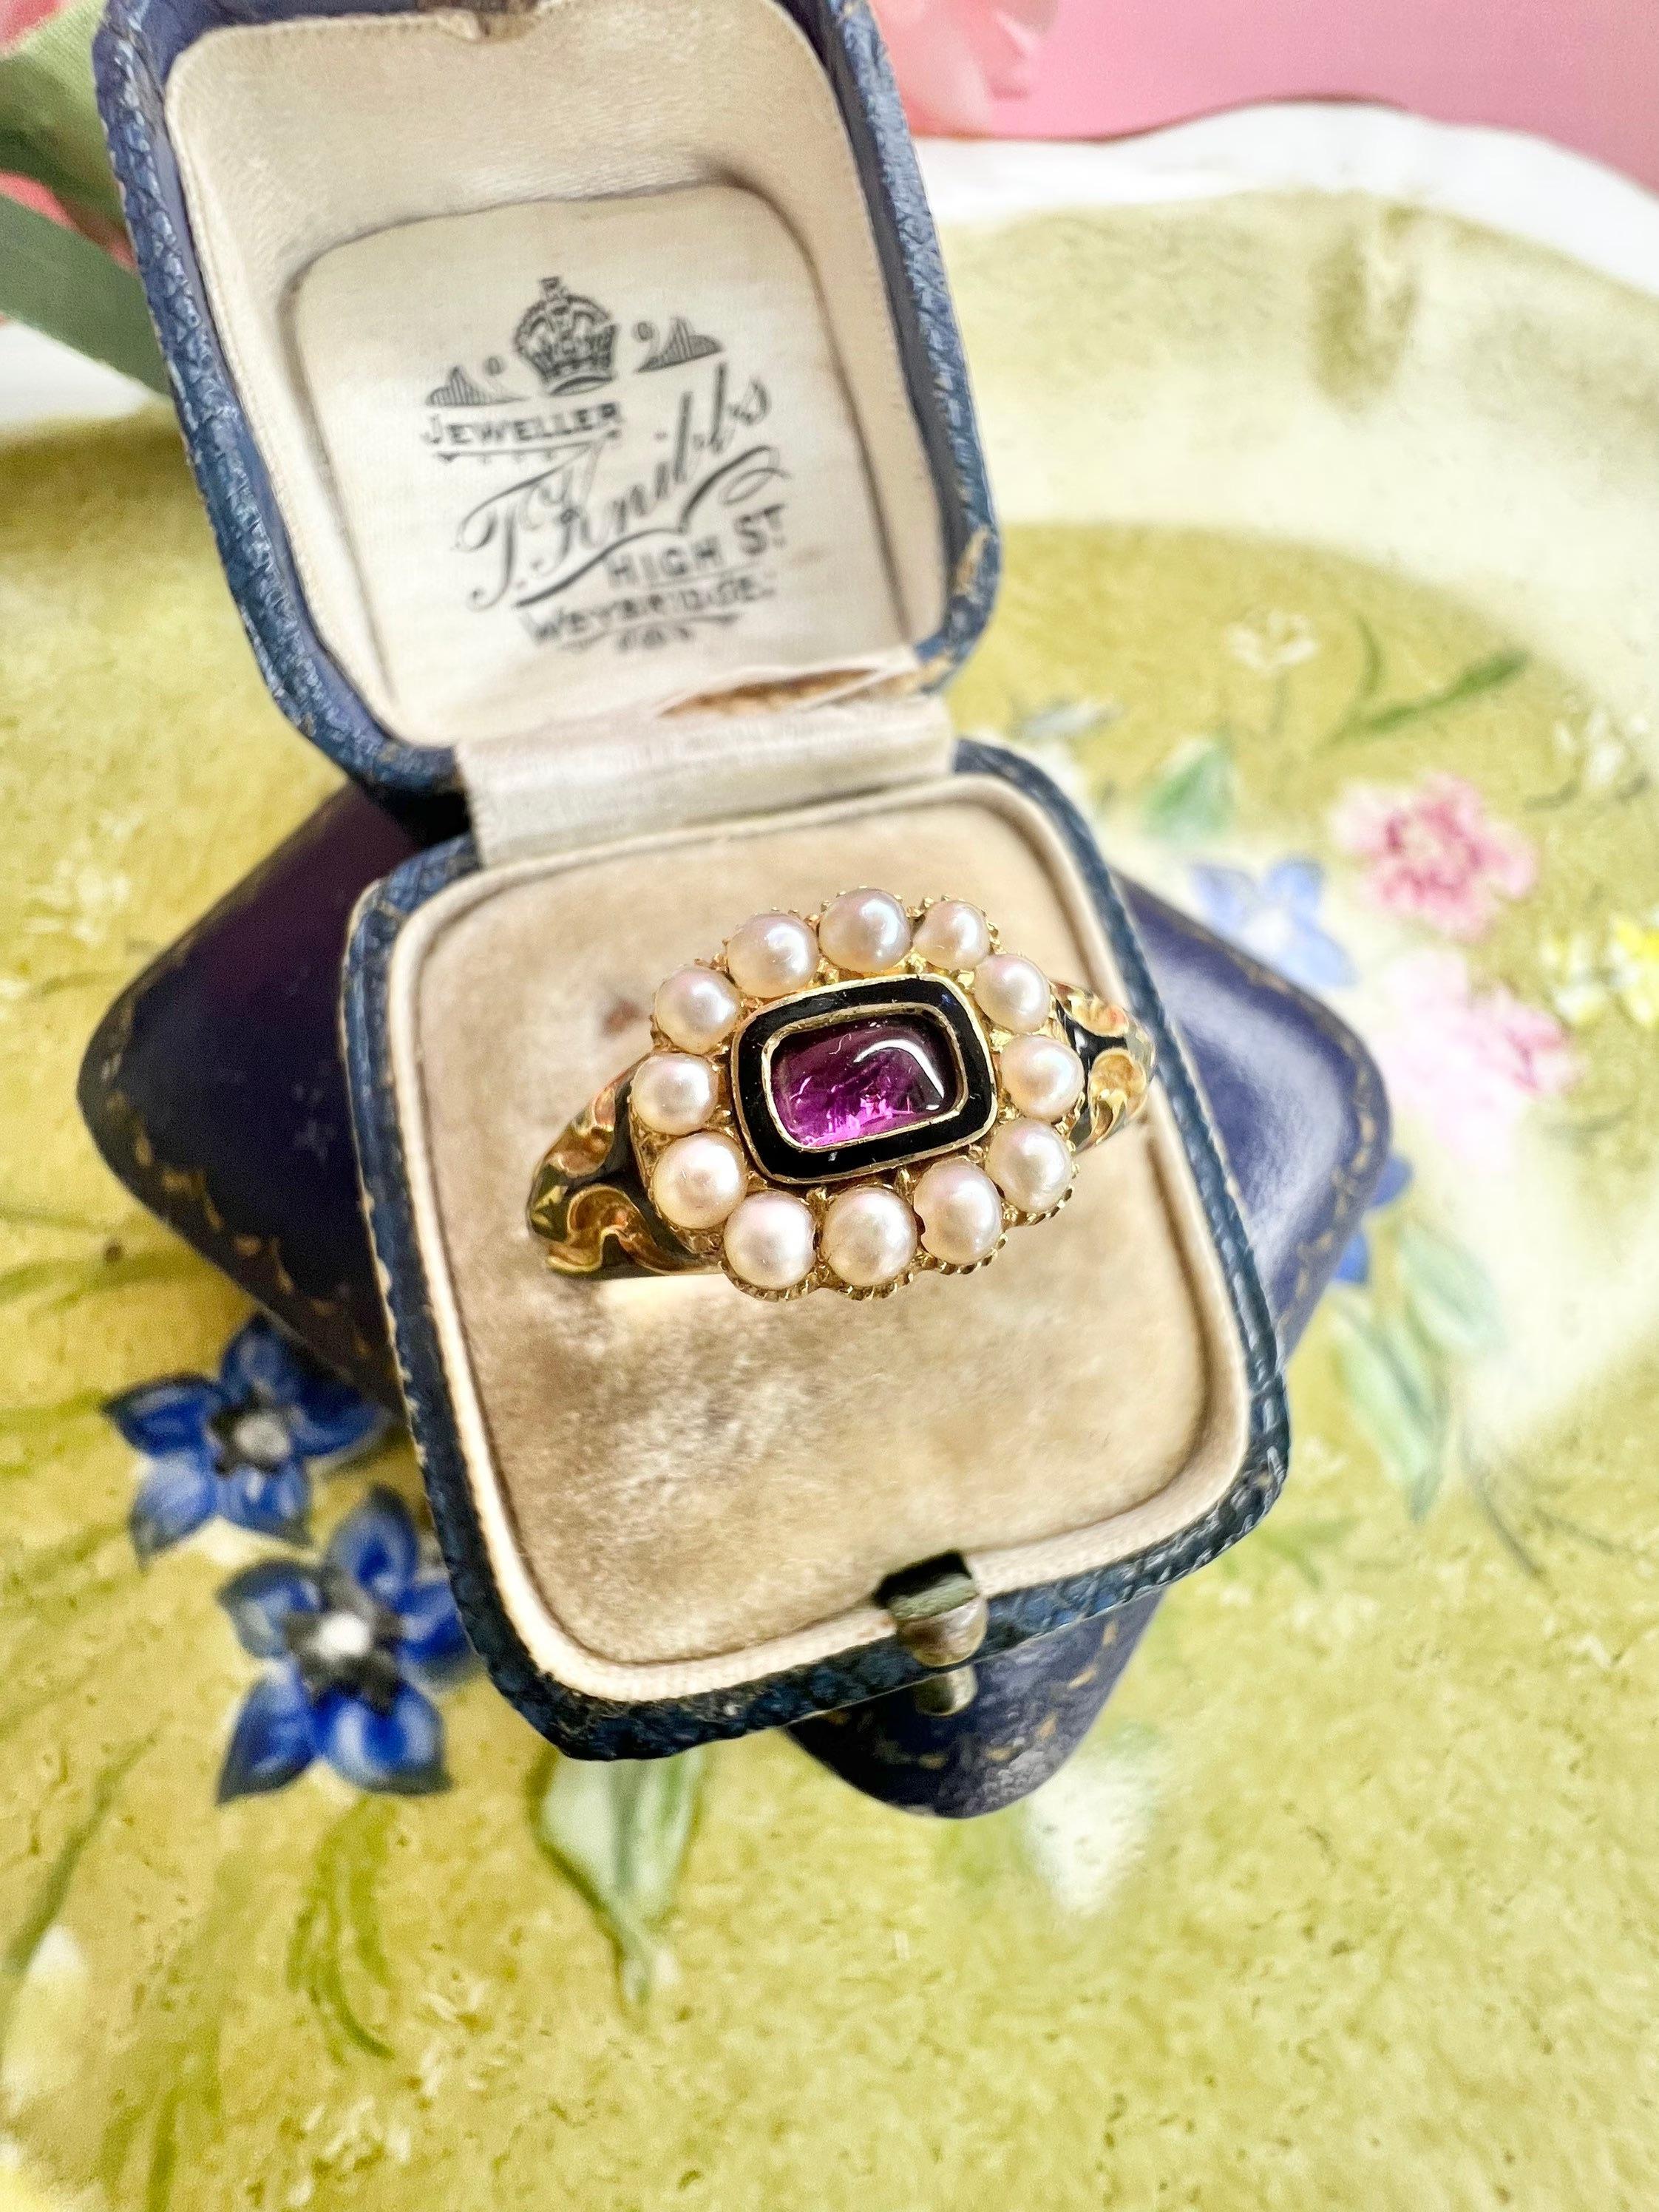 Antique Mourning Ring 

18ct Gold 

Hallmarked London 1844 

Makers Mark S R 

Beautiful Victorian Mourning Ring. Set with Natural Seed Pearls & a Cabochon Foil Backed Gemstone- Possibly a Garnet Stone. 
Beautifully Decorated Shoulders with Black